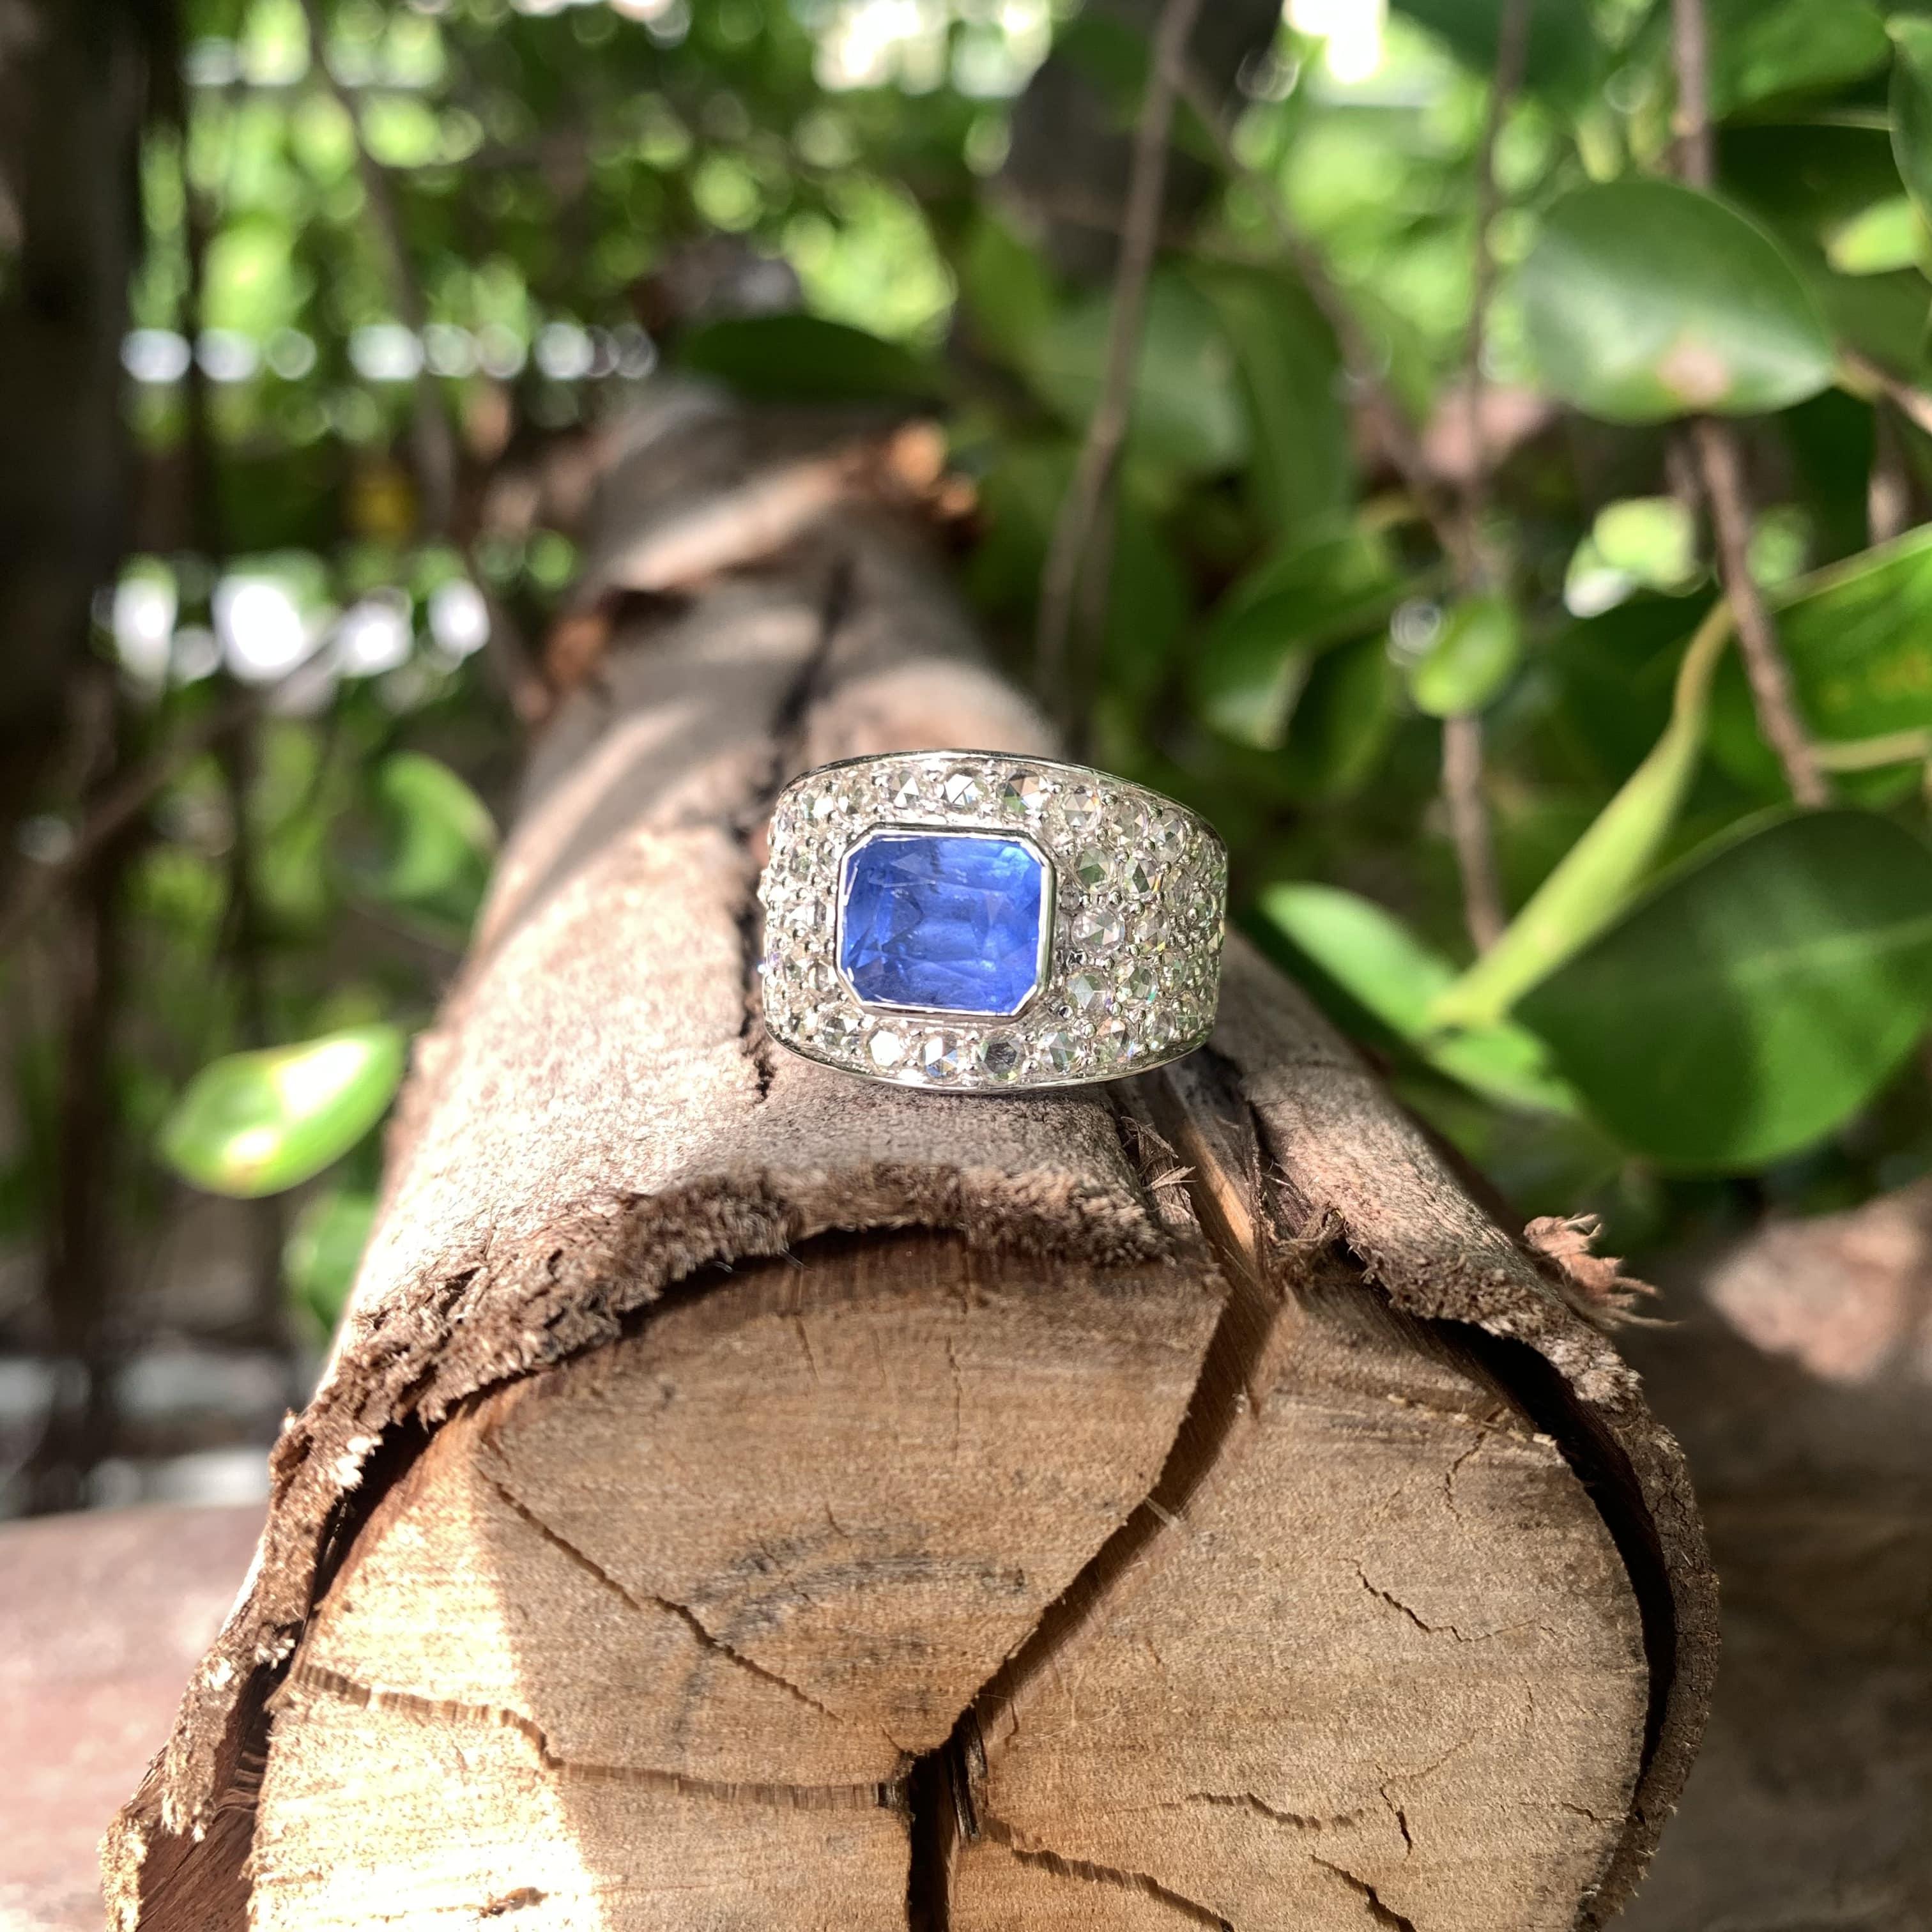 Men's 3.56 Carat Ceylon Sapphire Ring with Rose Cut Diamonds in 14k White Gold  For Sale 6